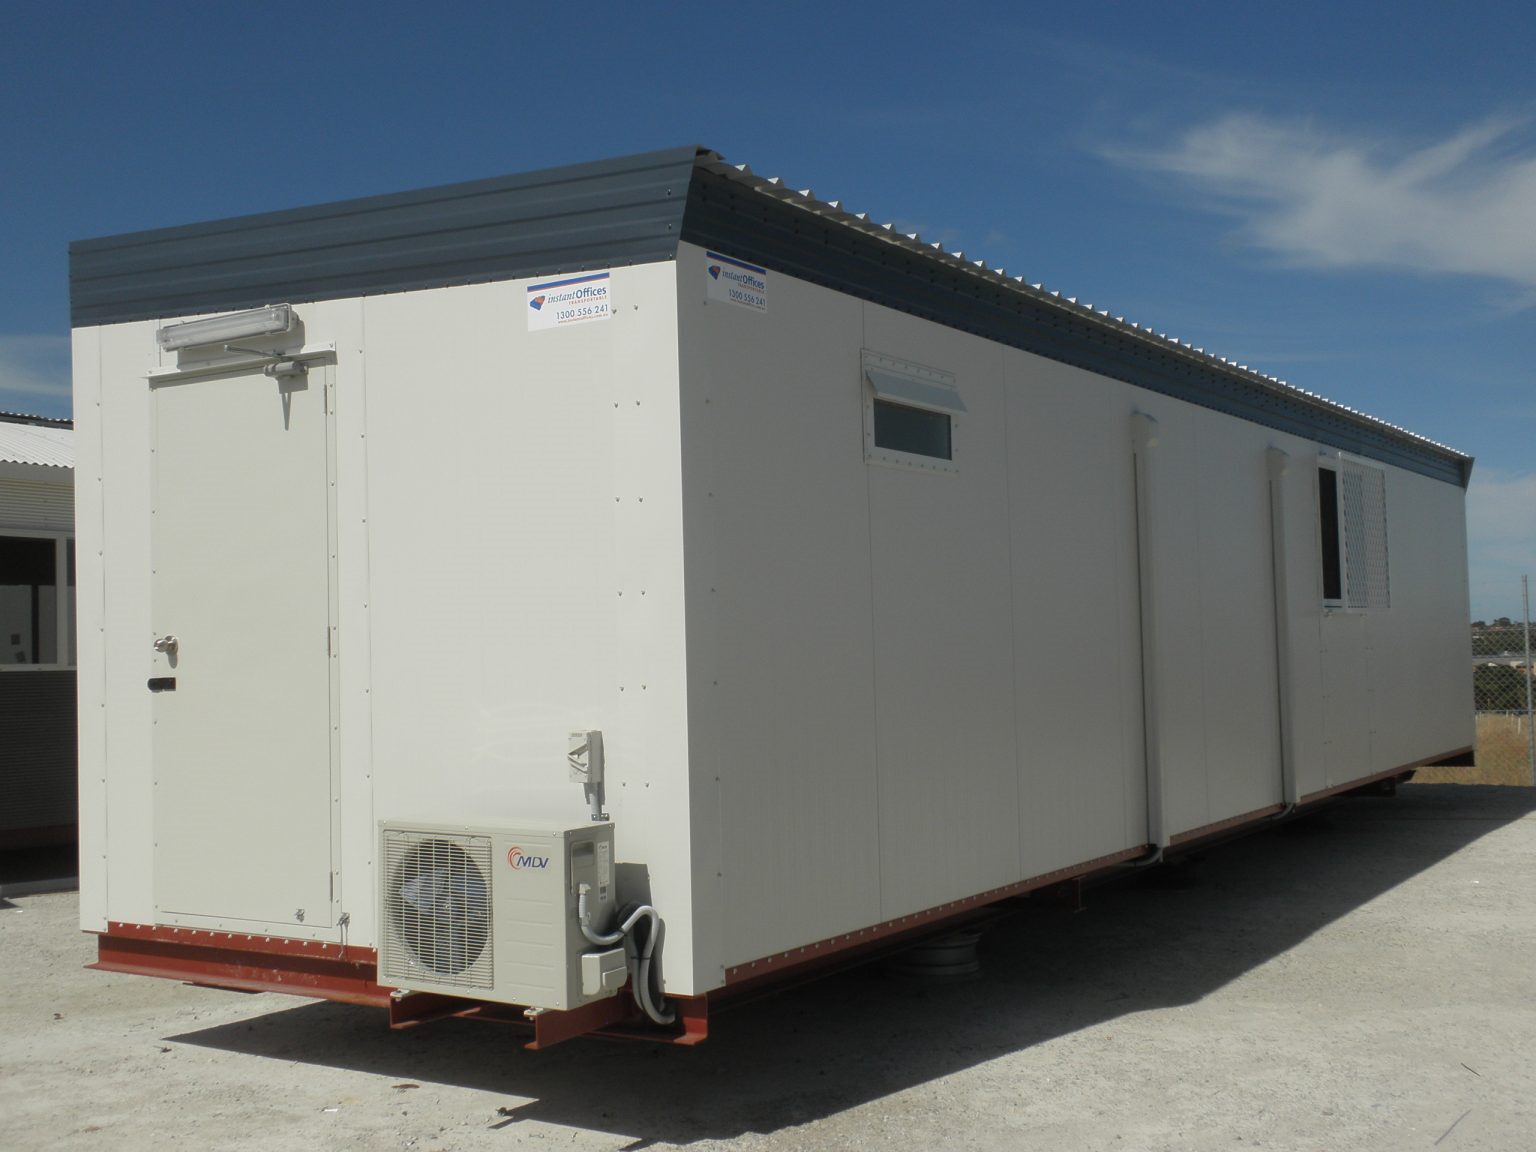 Long white portable office unit with security bars on windows and an air conditioning unit on the side.